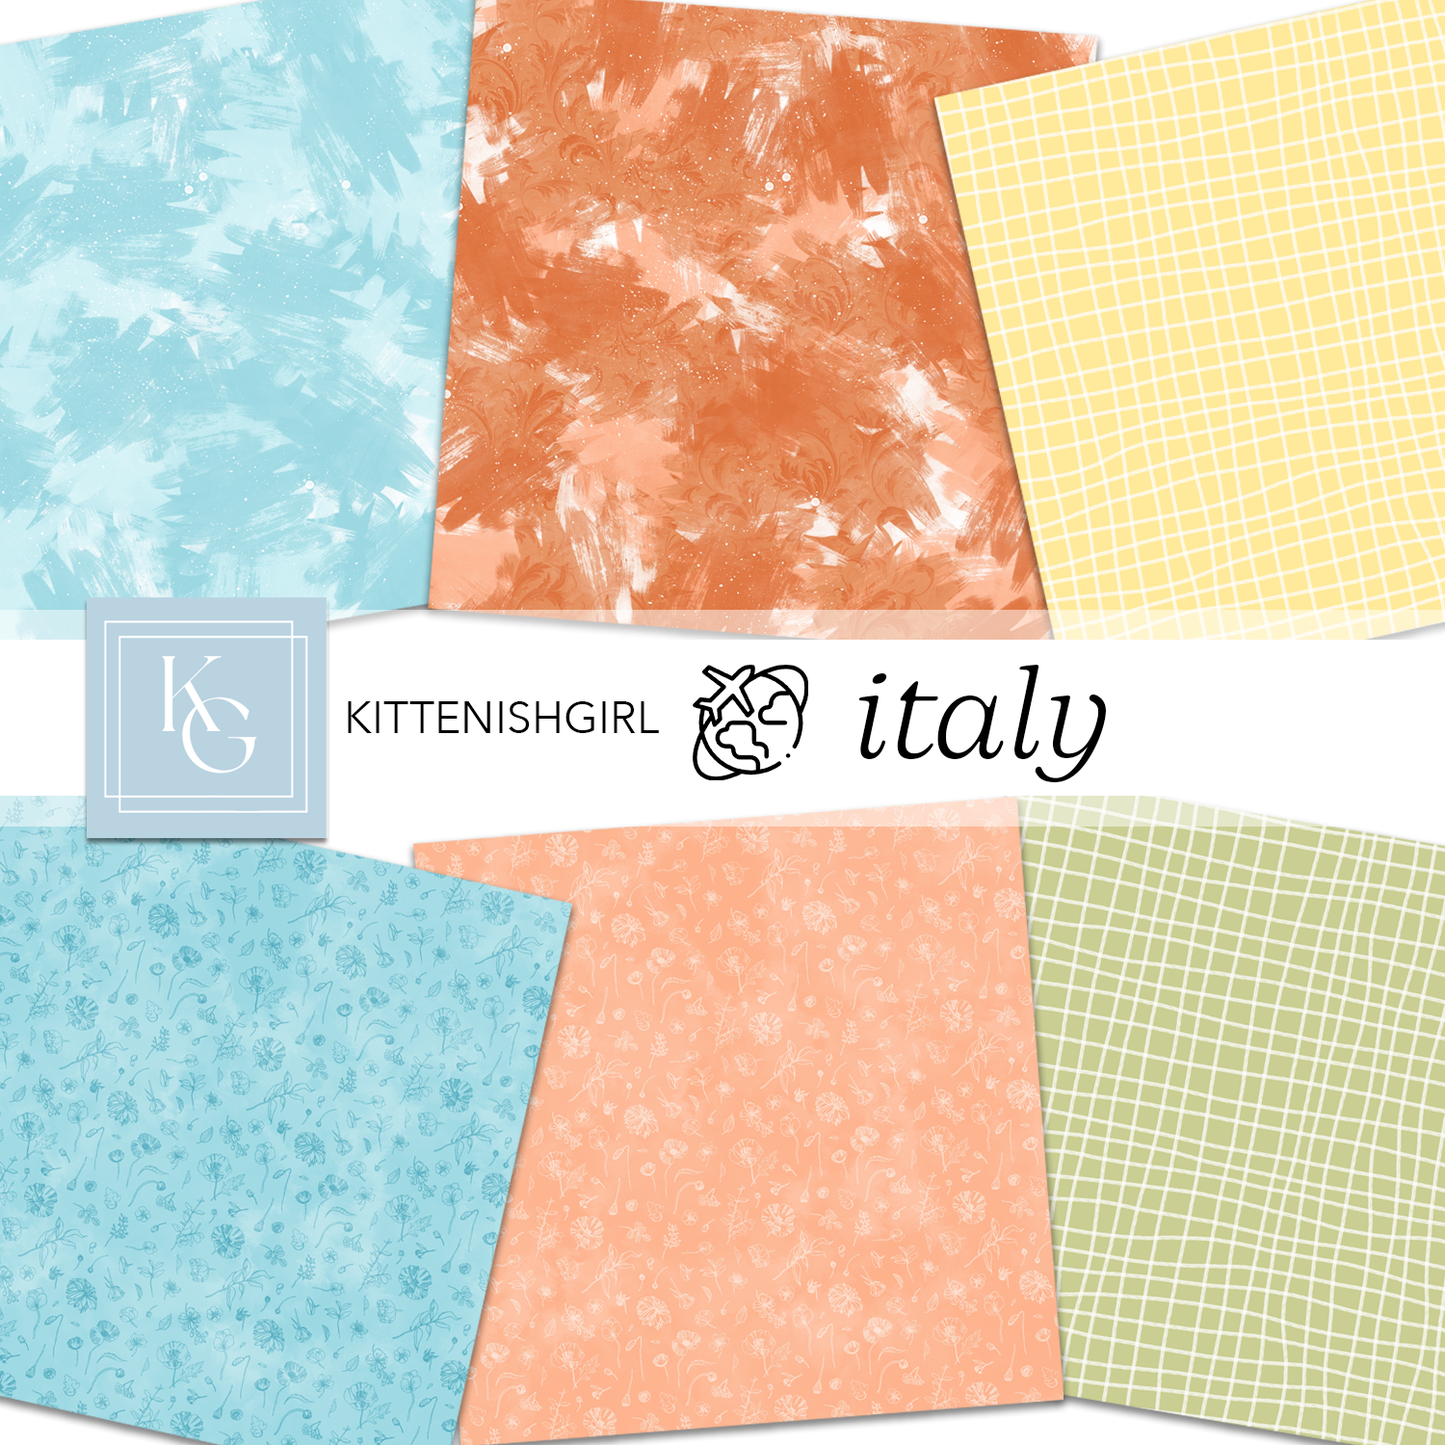 Italy // Digital Papers